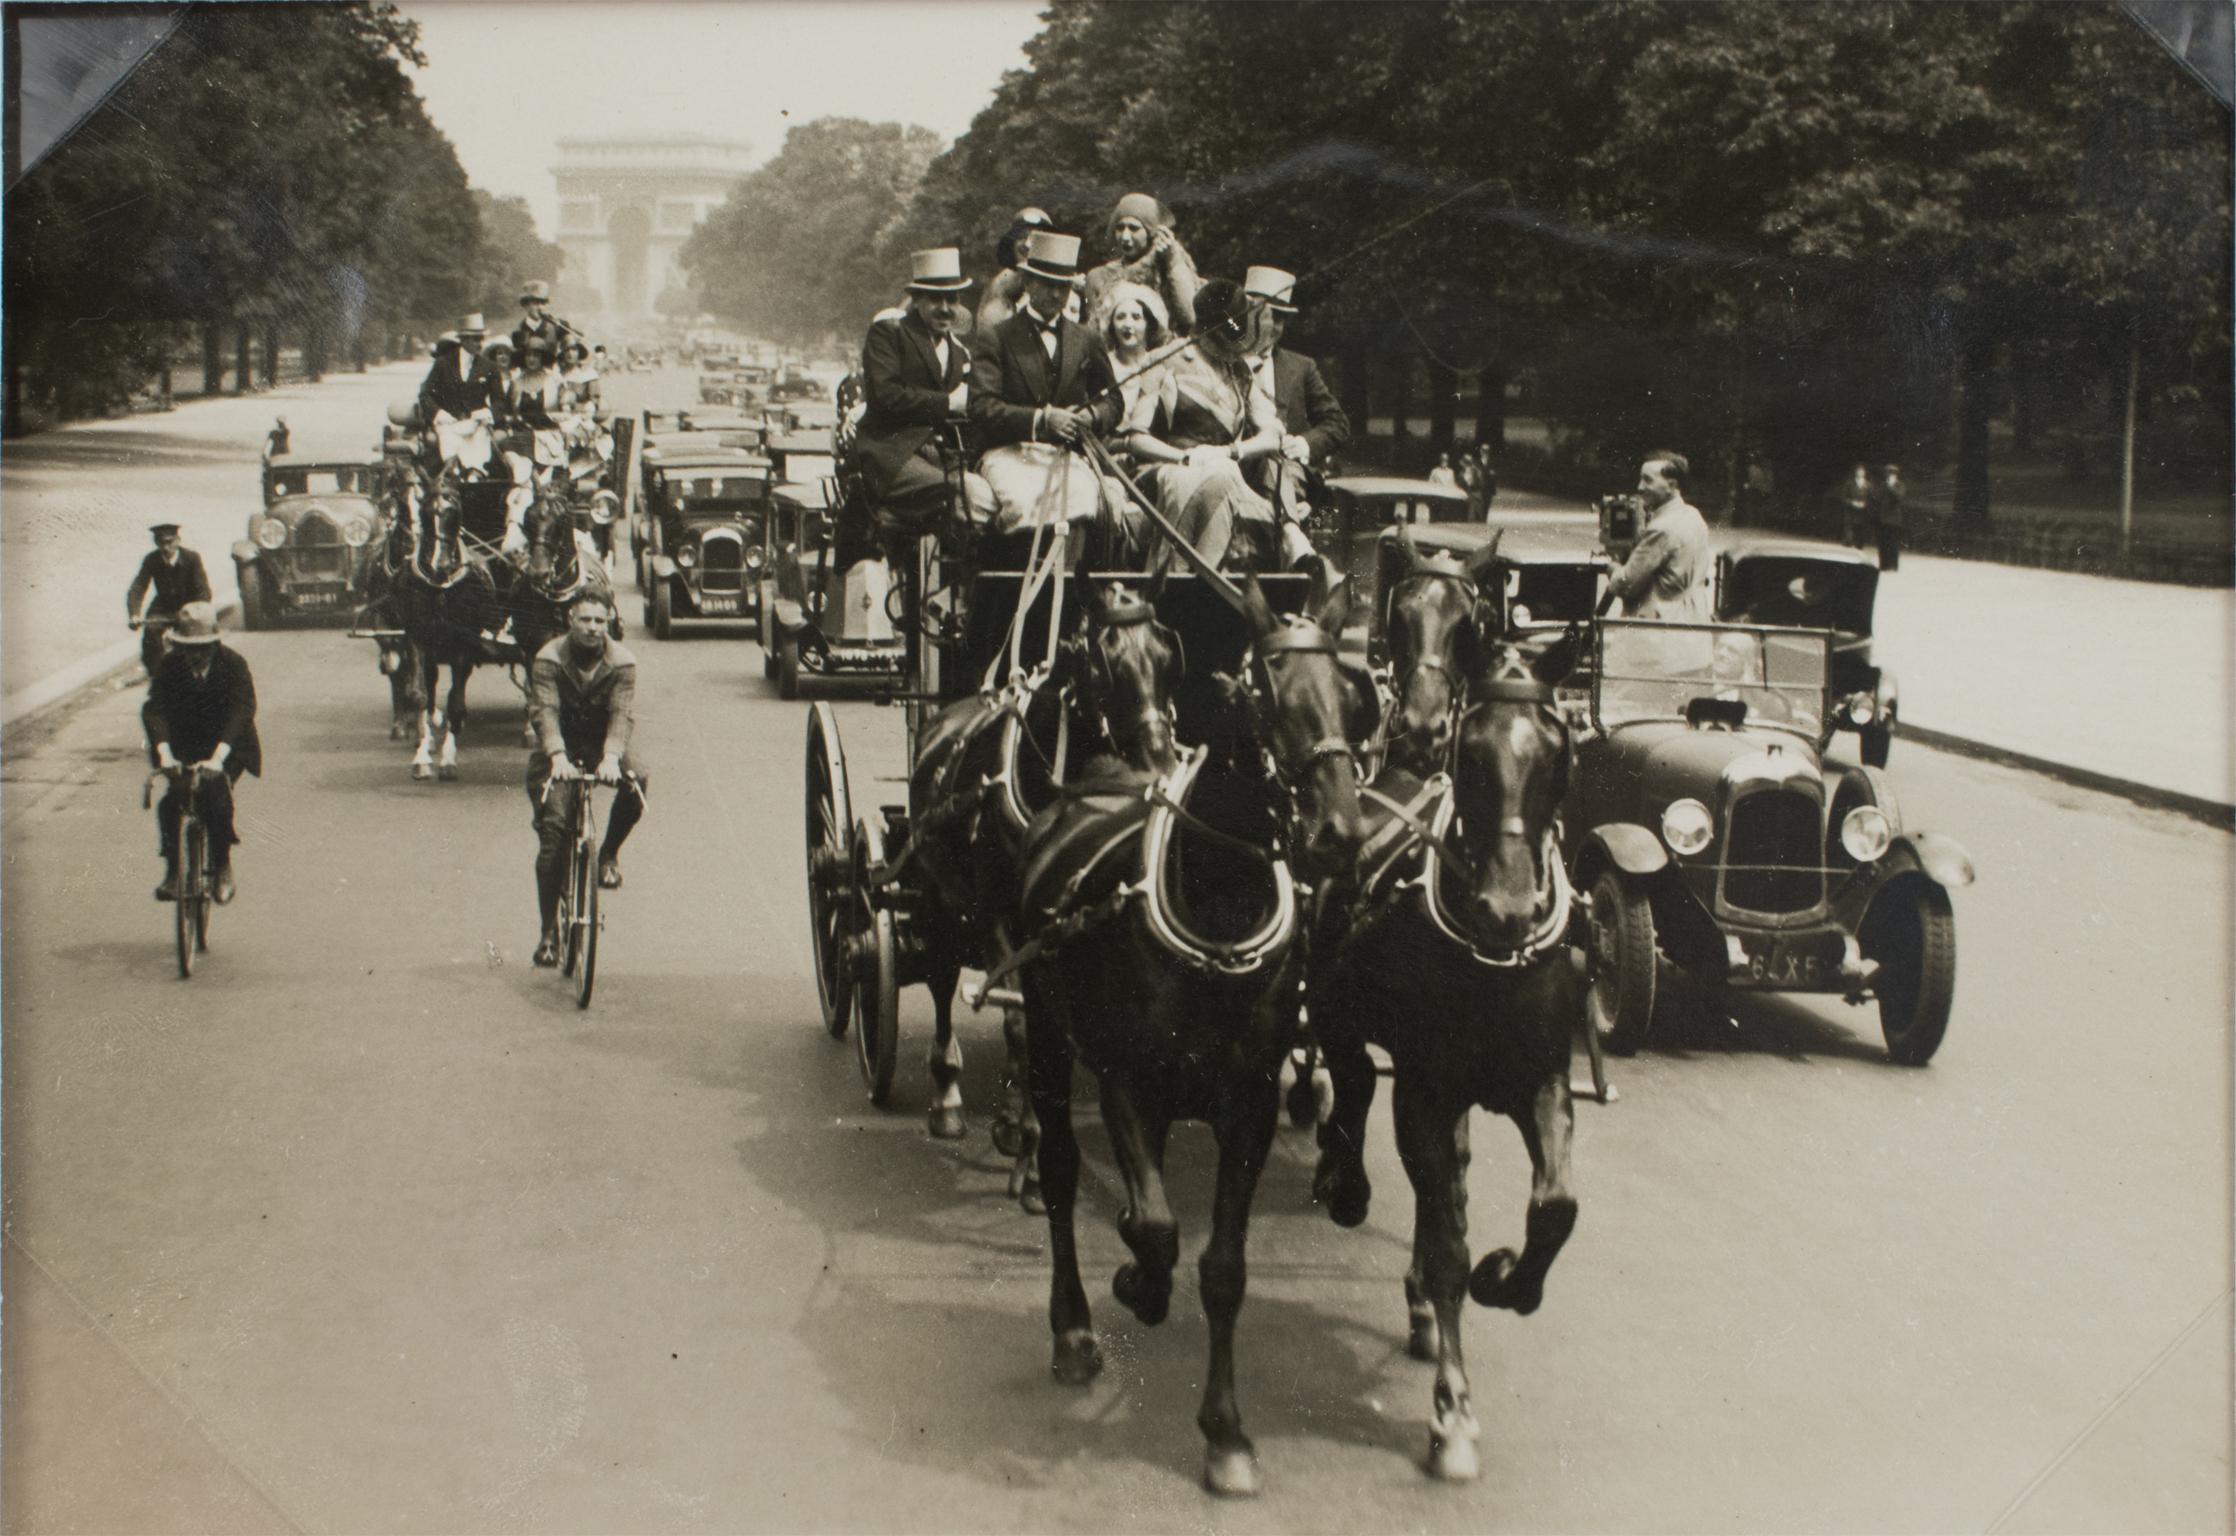 A unique original silver gelatin black and white photograph shooted by Press Agency Trampus. Paris, carriages, and cars, circa 1930.
Features:
Original silver gelatin print photography unframed.
Press photography.
Press agency: Agency Trampus,